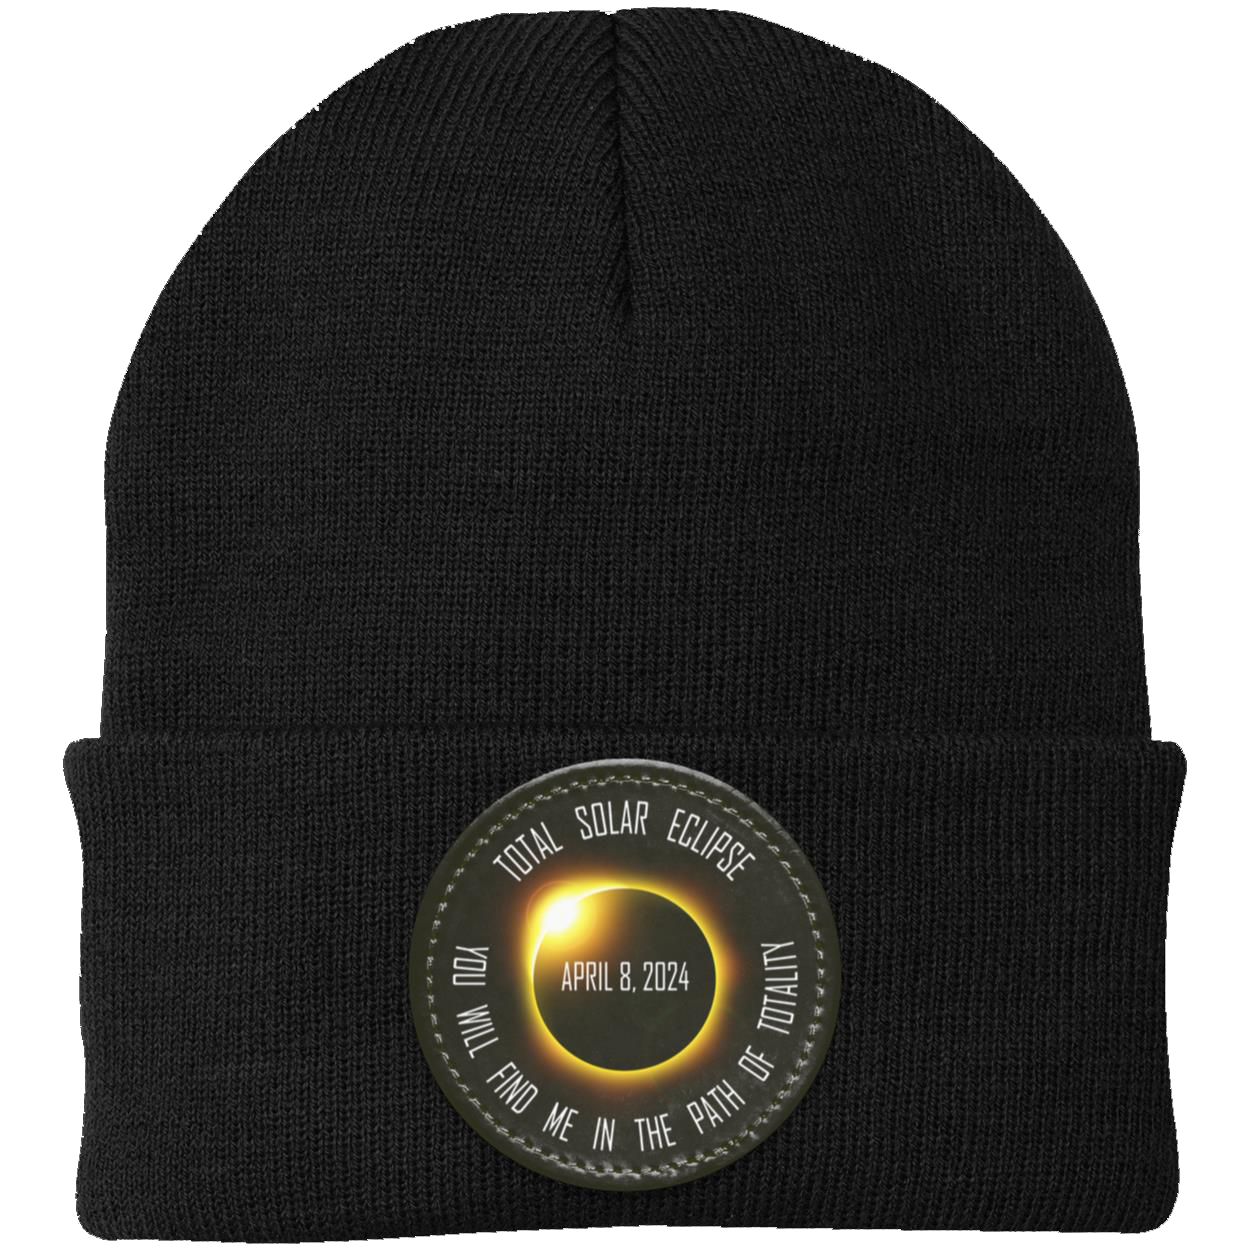 Total Solar Eclipse April 8 2024, You Will Find Me in the Path of Totality, 2024 Eclipse beanie Knit Cap - Patch